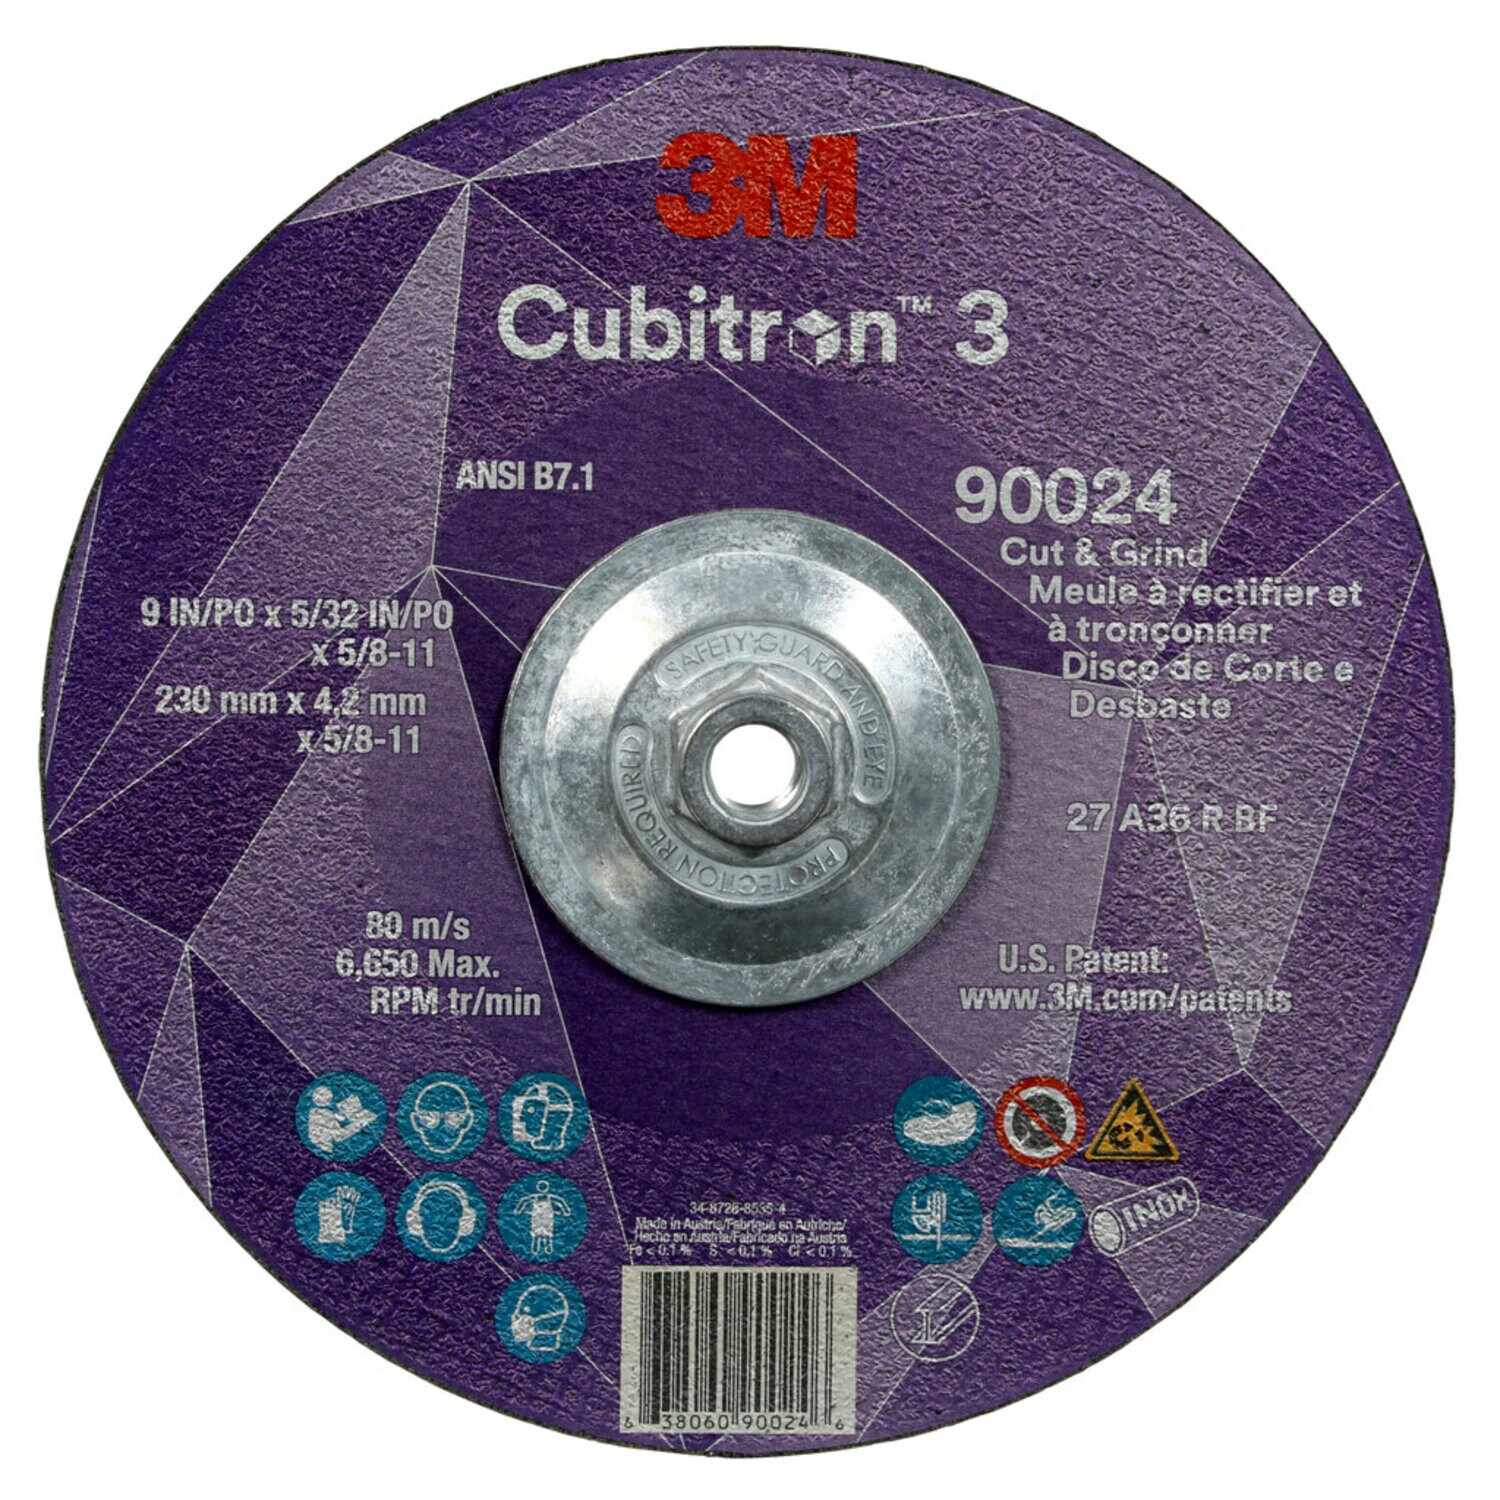 7100313203 - 3M Cubitron 3 Cut and Grind Wheel, 90024, 36+, T27, 9 in x 5/32 in x
5/8 in-11 (230 x 4.2 mm x 5/8-11 in), ANSI, 10 ea/Case